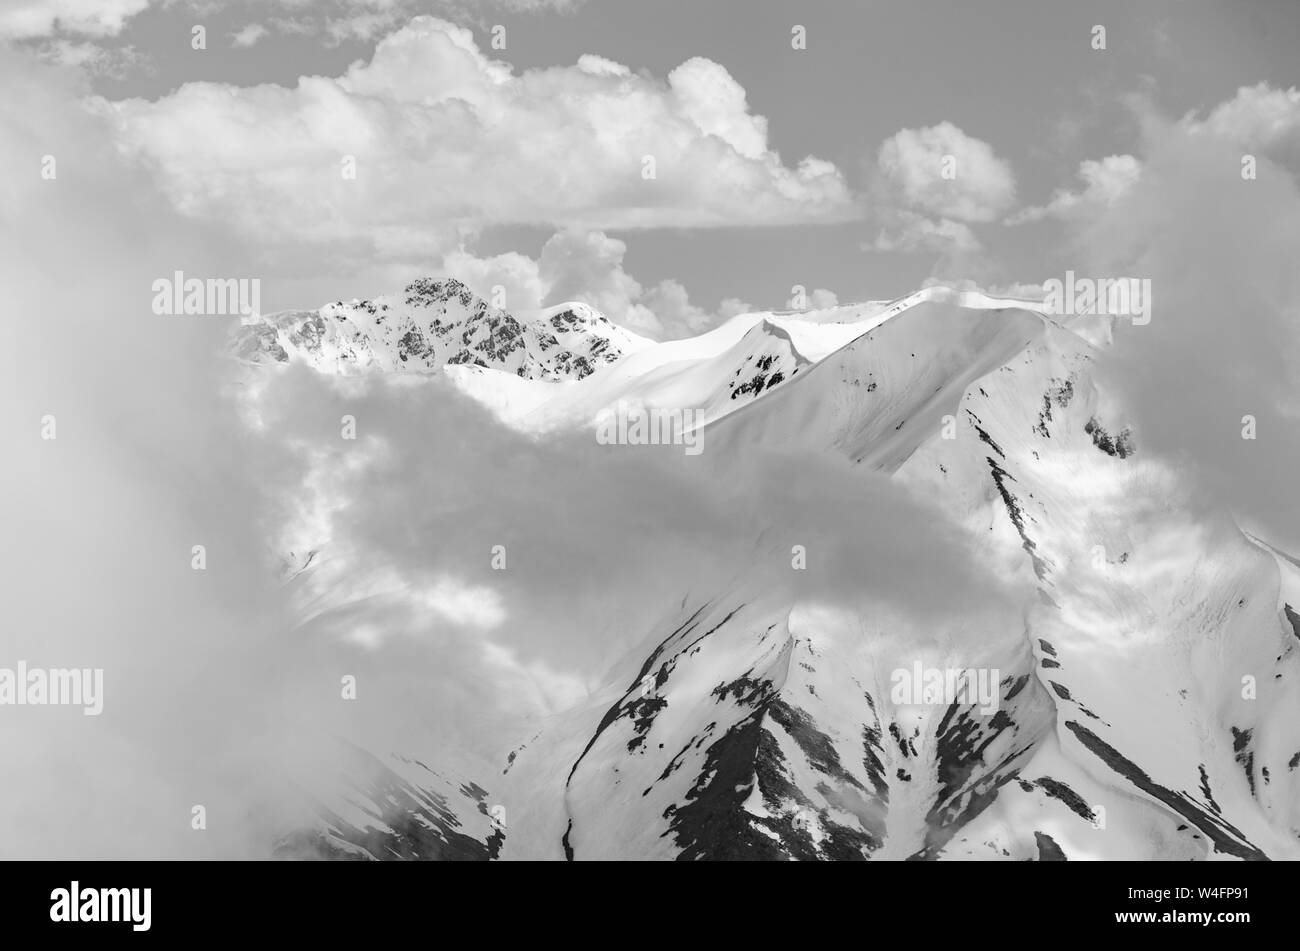 Kashmir scenery Black and White Stock Photos & Images - Alamy